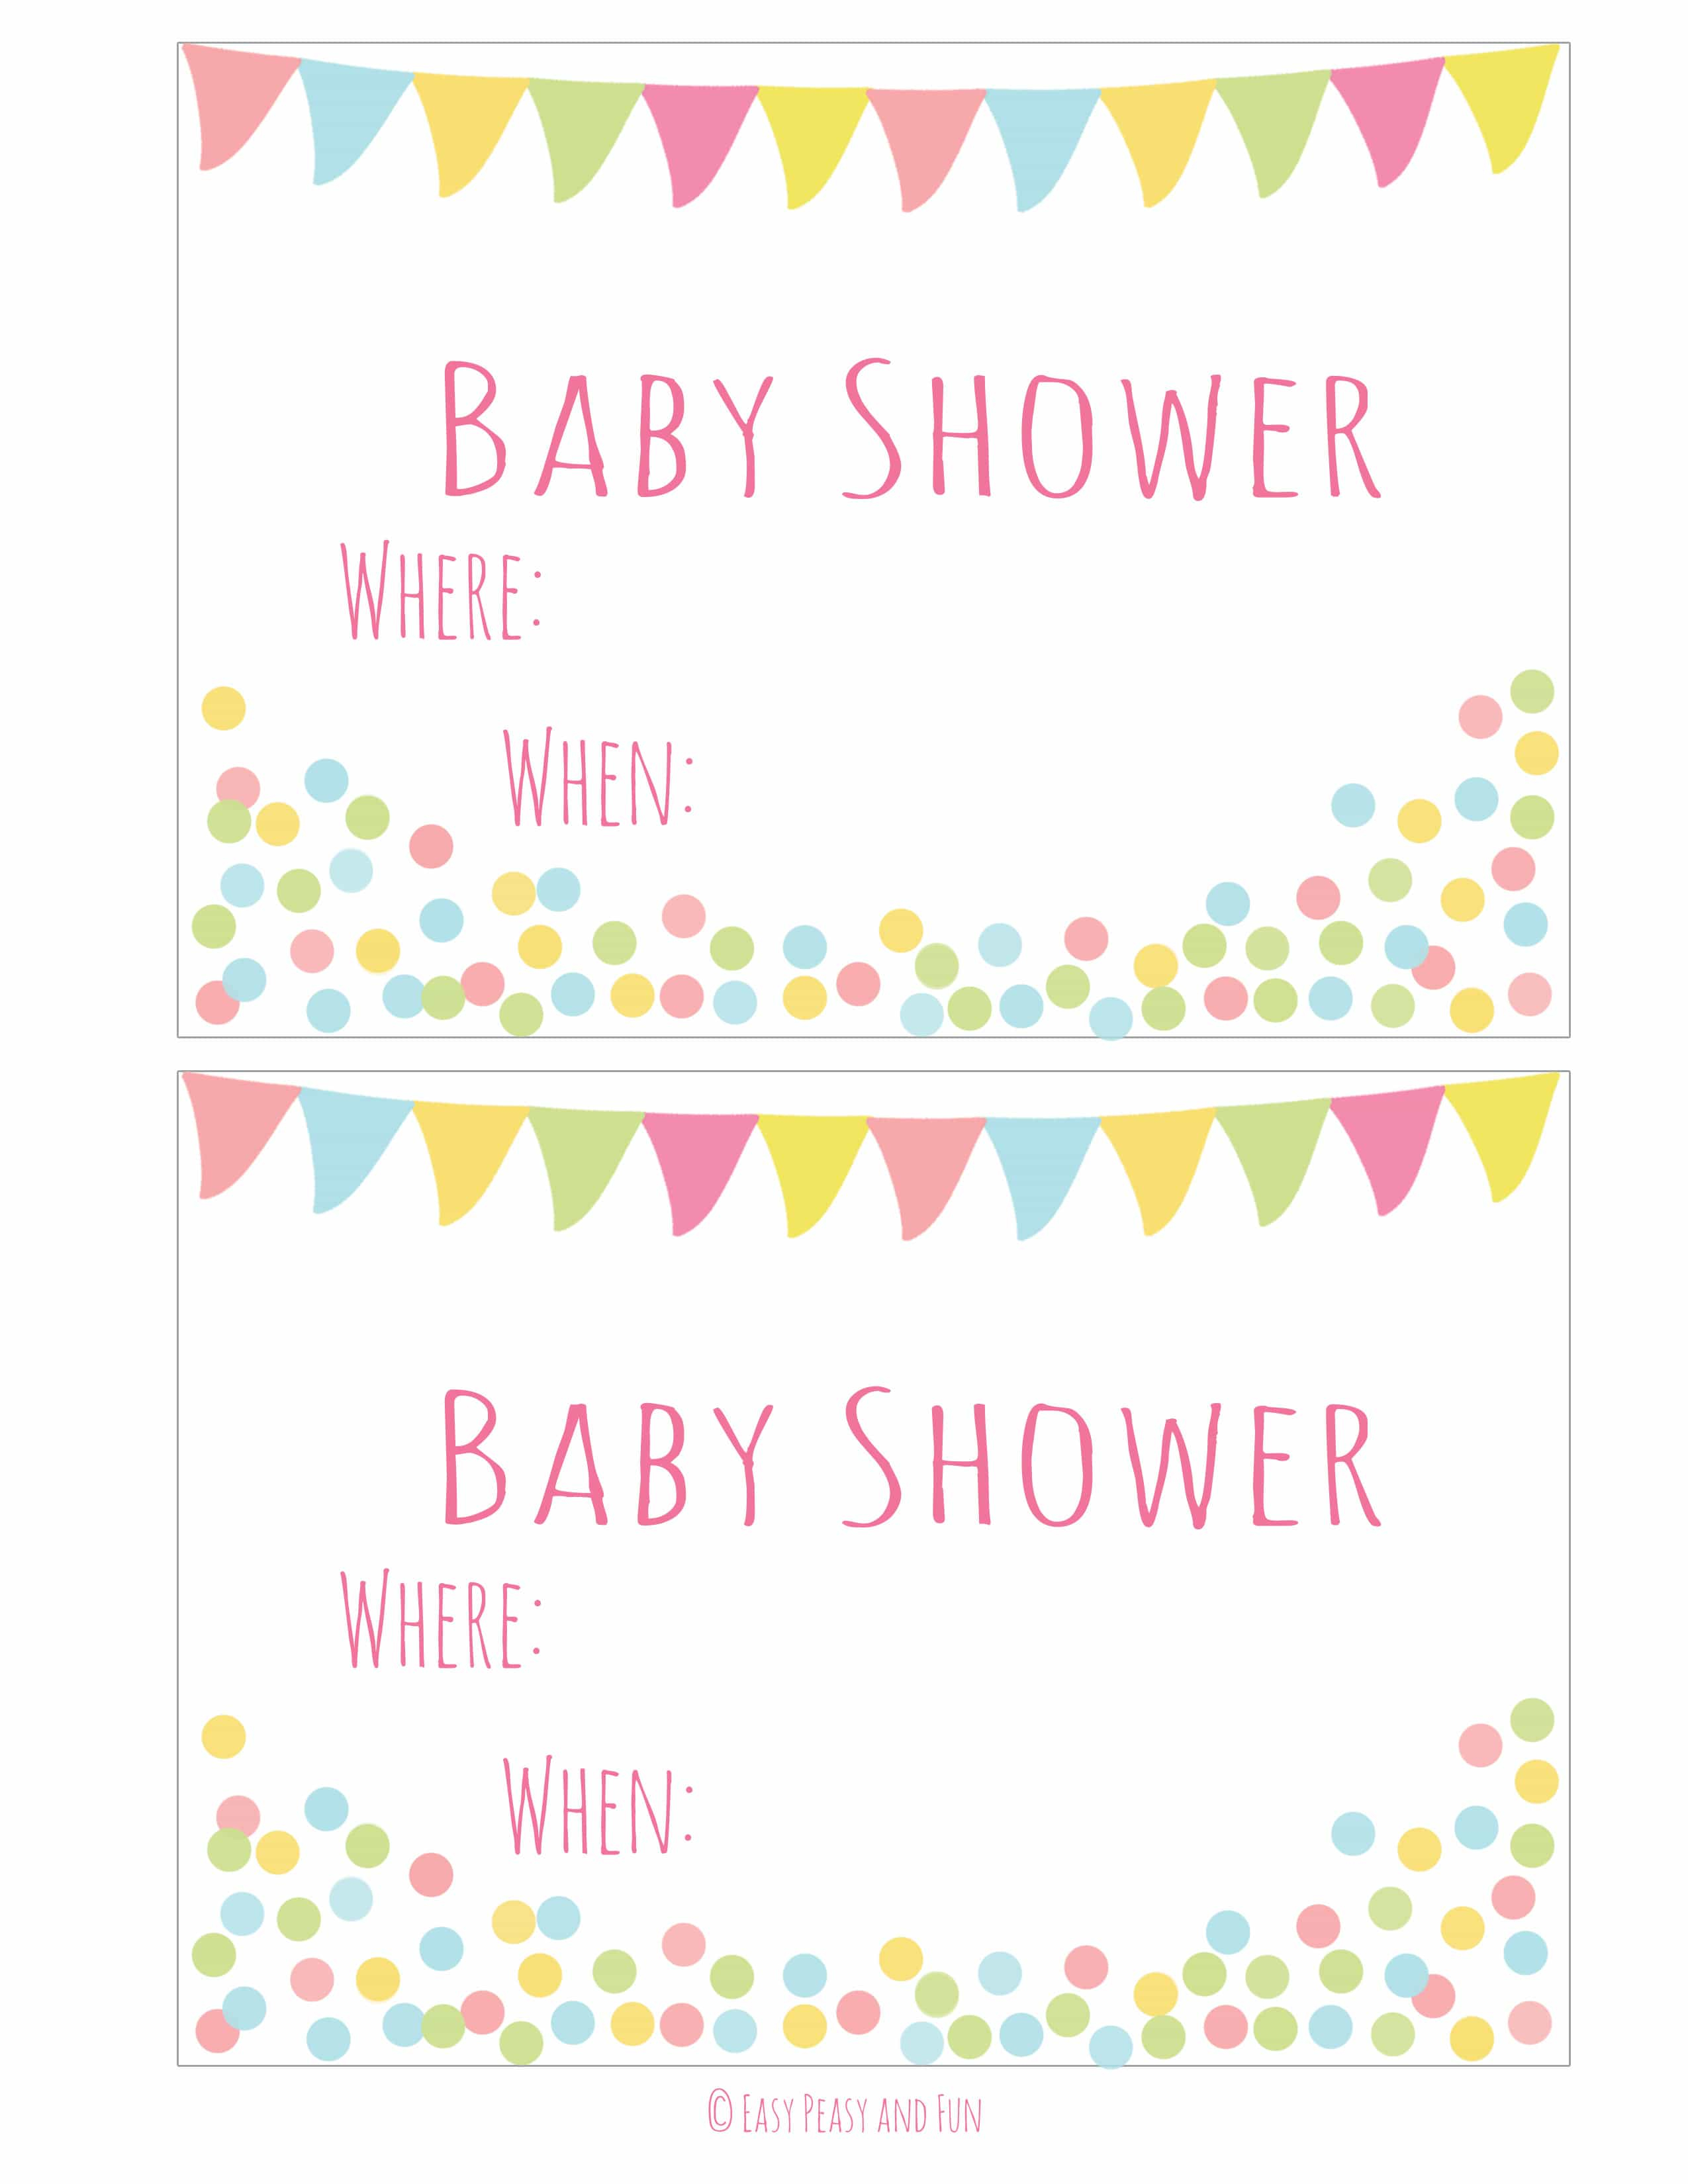 Free Printable Ba Shower Invitation Easy Peasy And Fun within dimensions 2550 X 3300